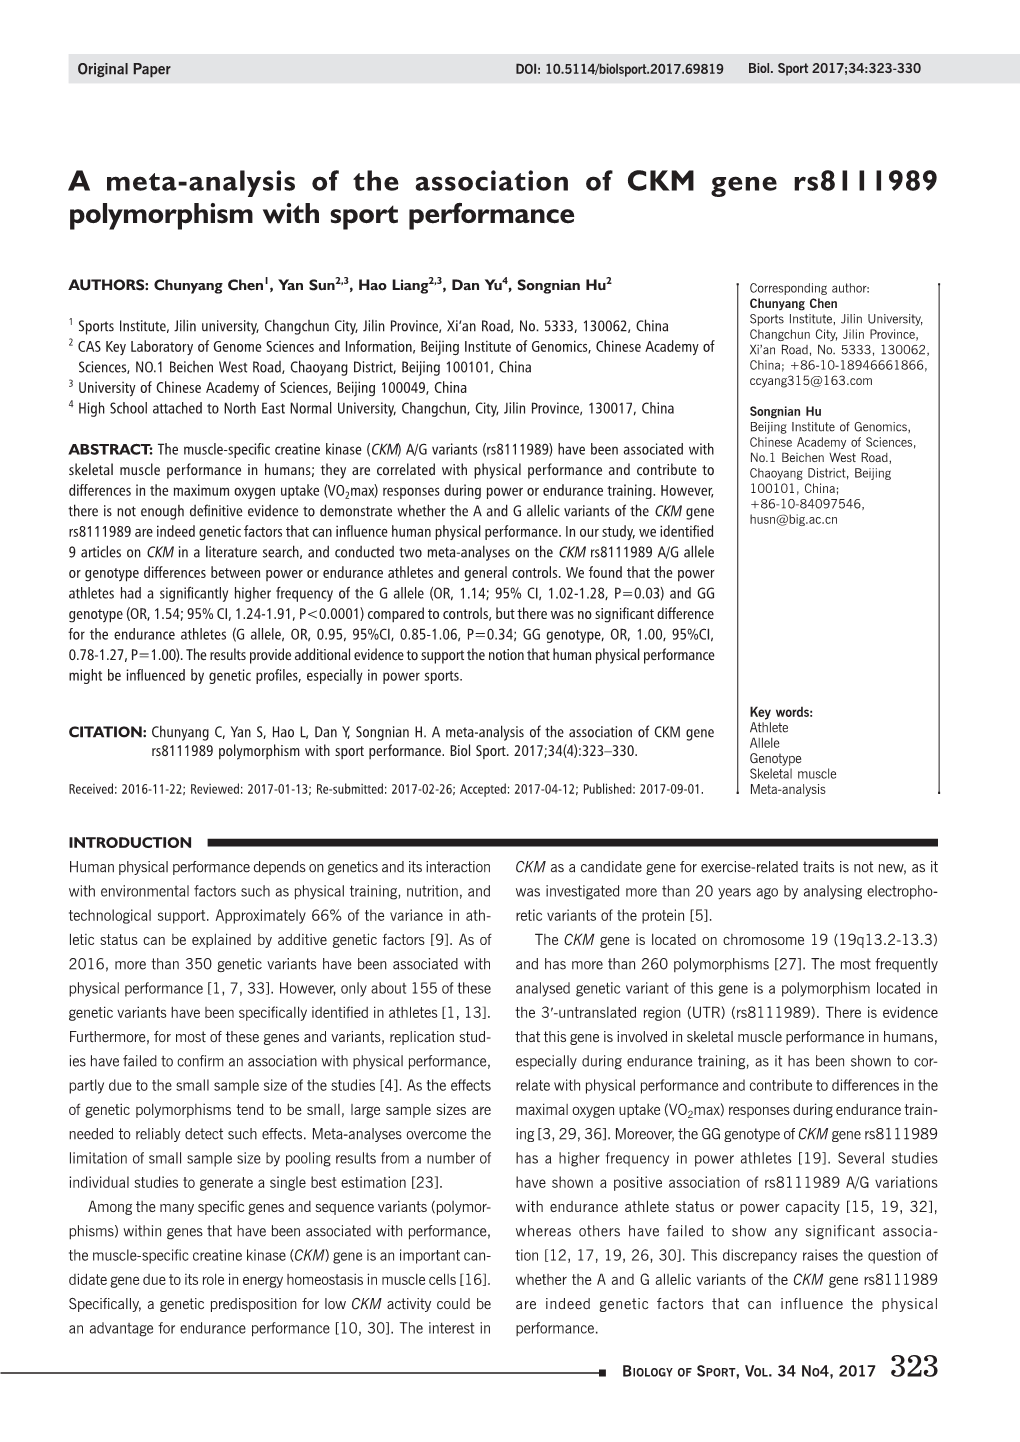 A Meta-Analysis of the Association of CKM Gene Rs8111989 Polymorphism with Sport Performance